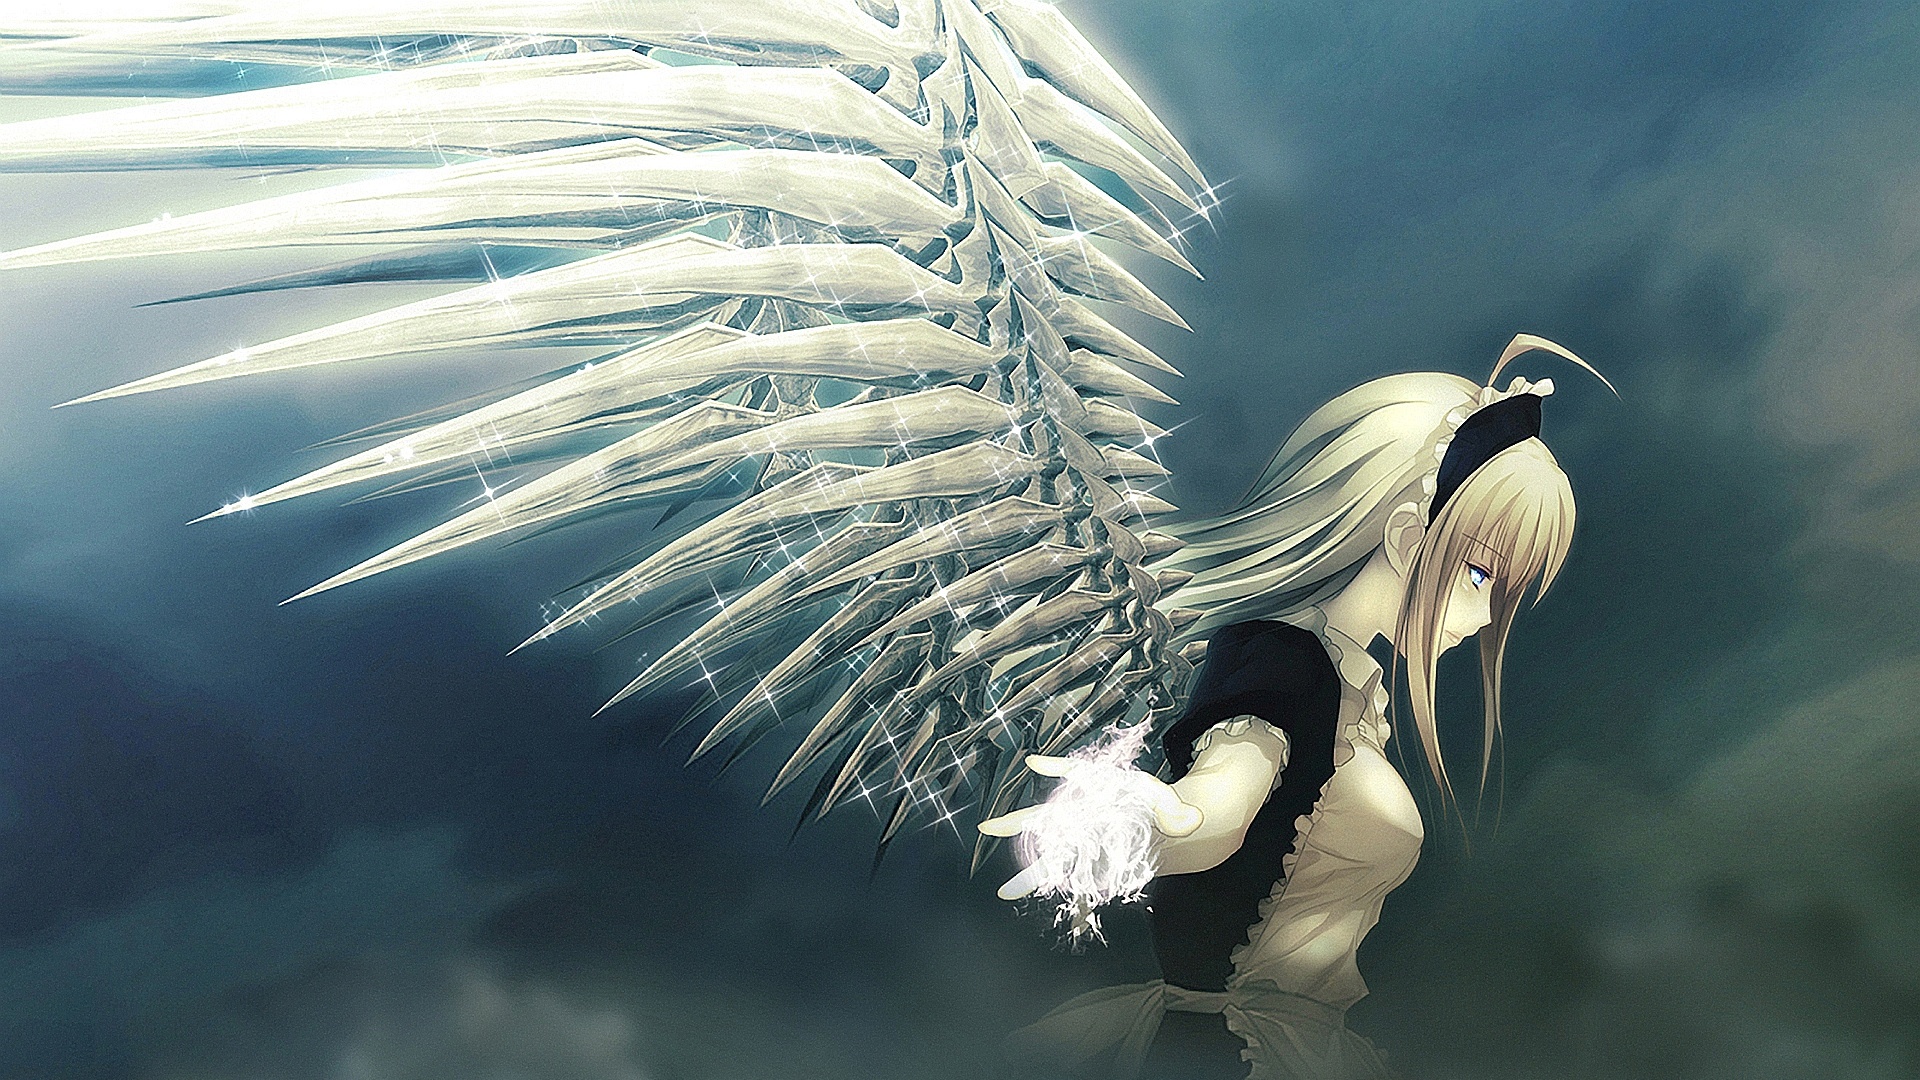 high resolution anime wallpapers,wing,feather,sky,cg artwork,angel